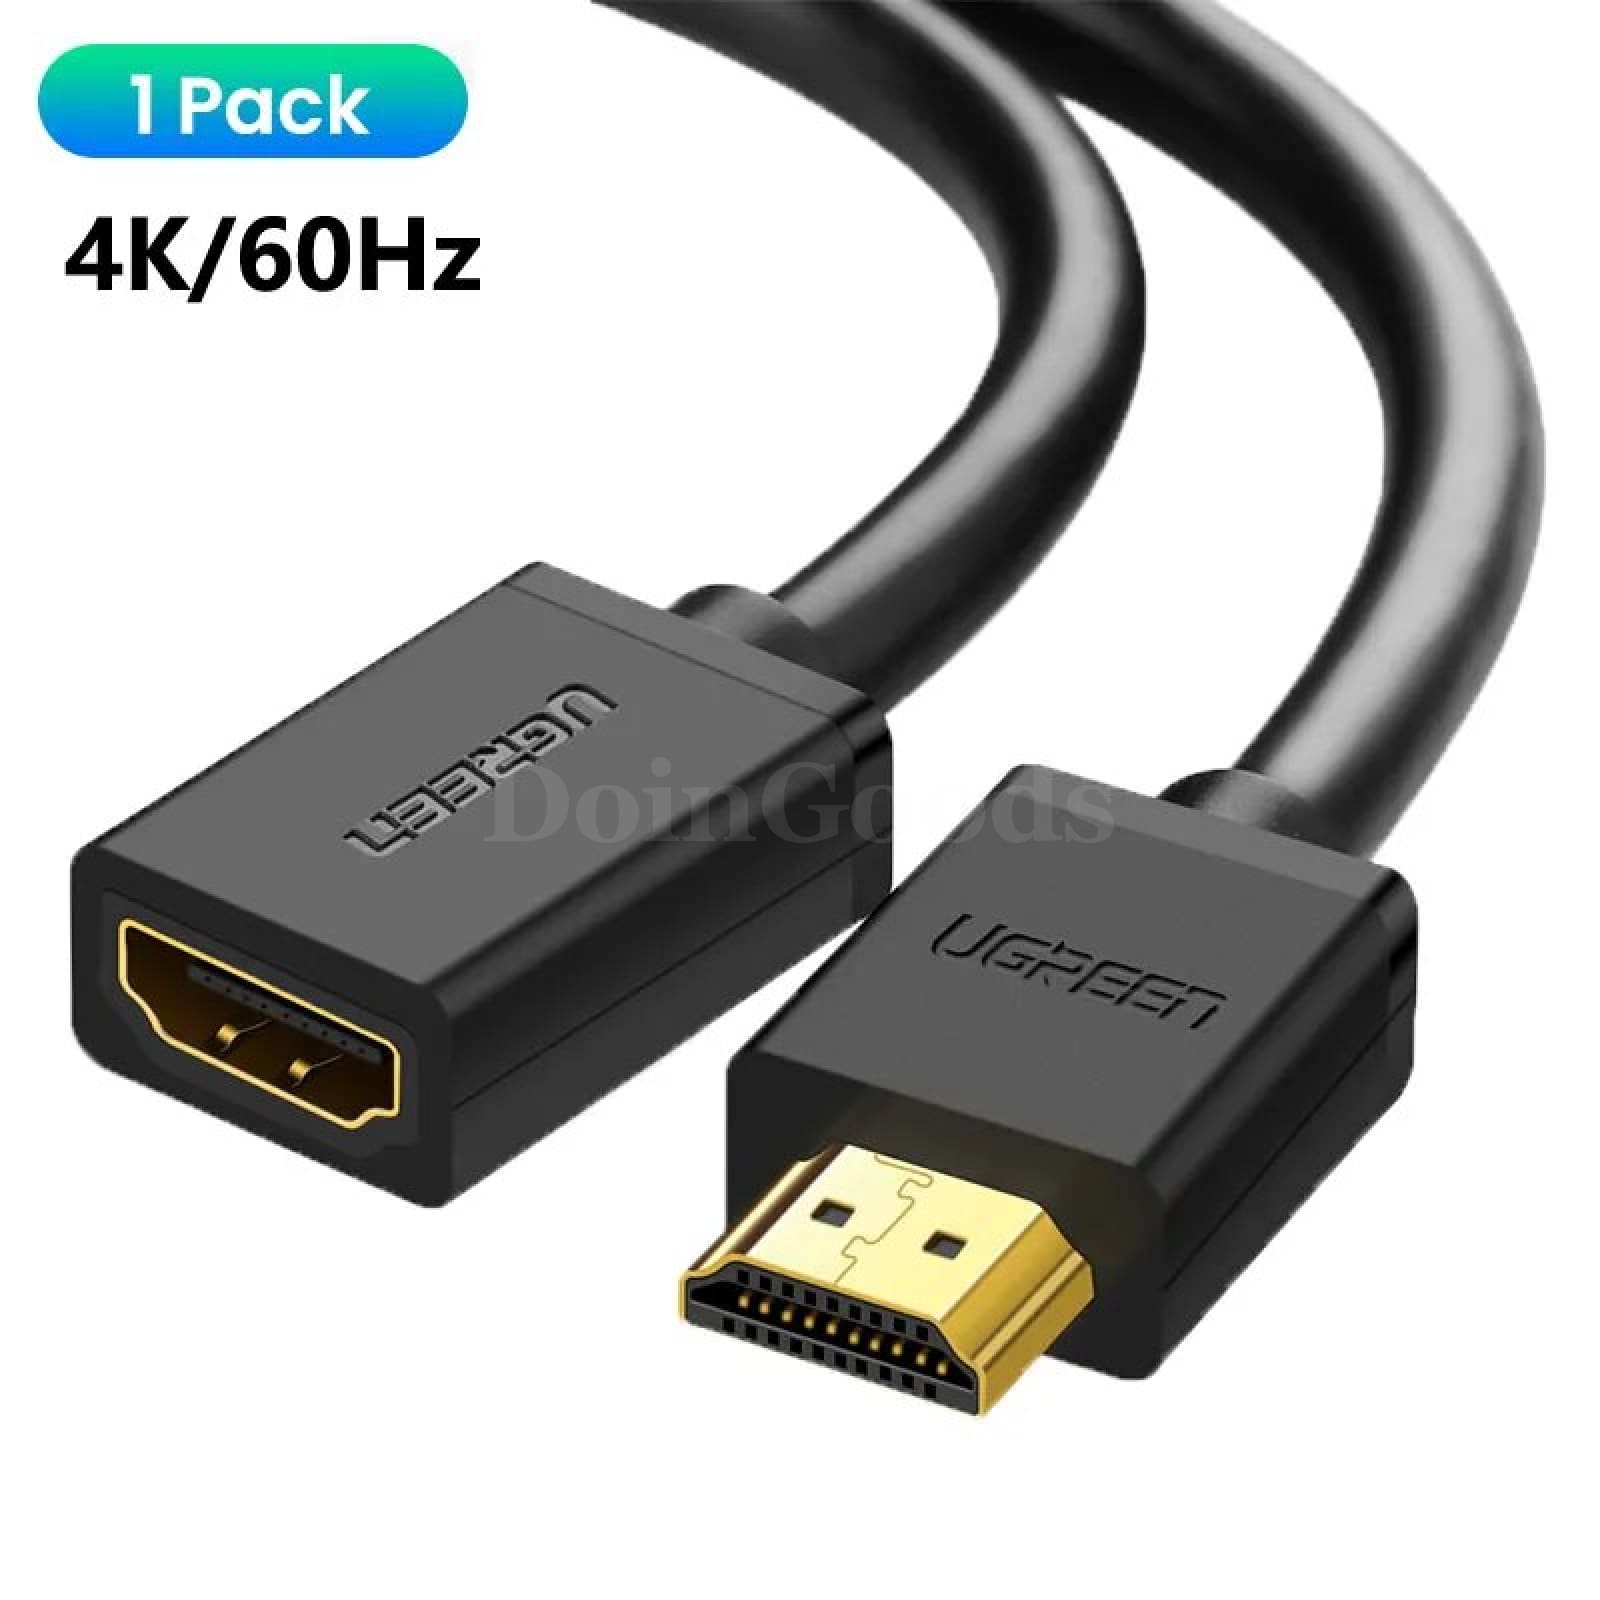 Ugreen Hdmi Extension Cable Extender Male To Female Cord Extention 1080P 4K 3D 1 Pack / 0.5M 301635-